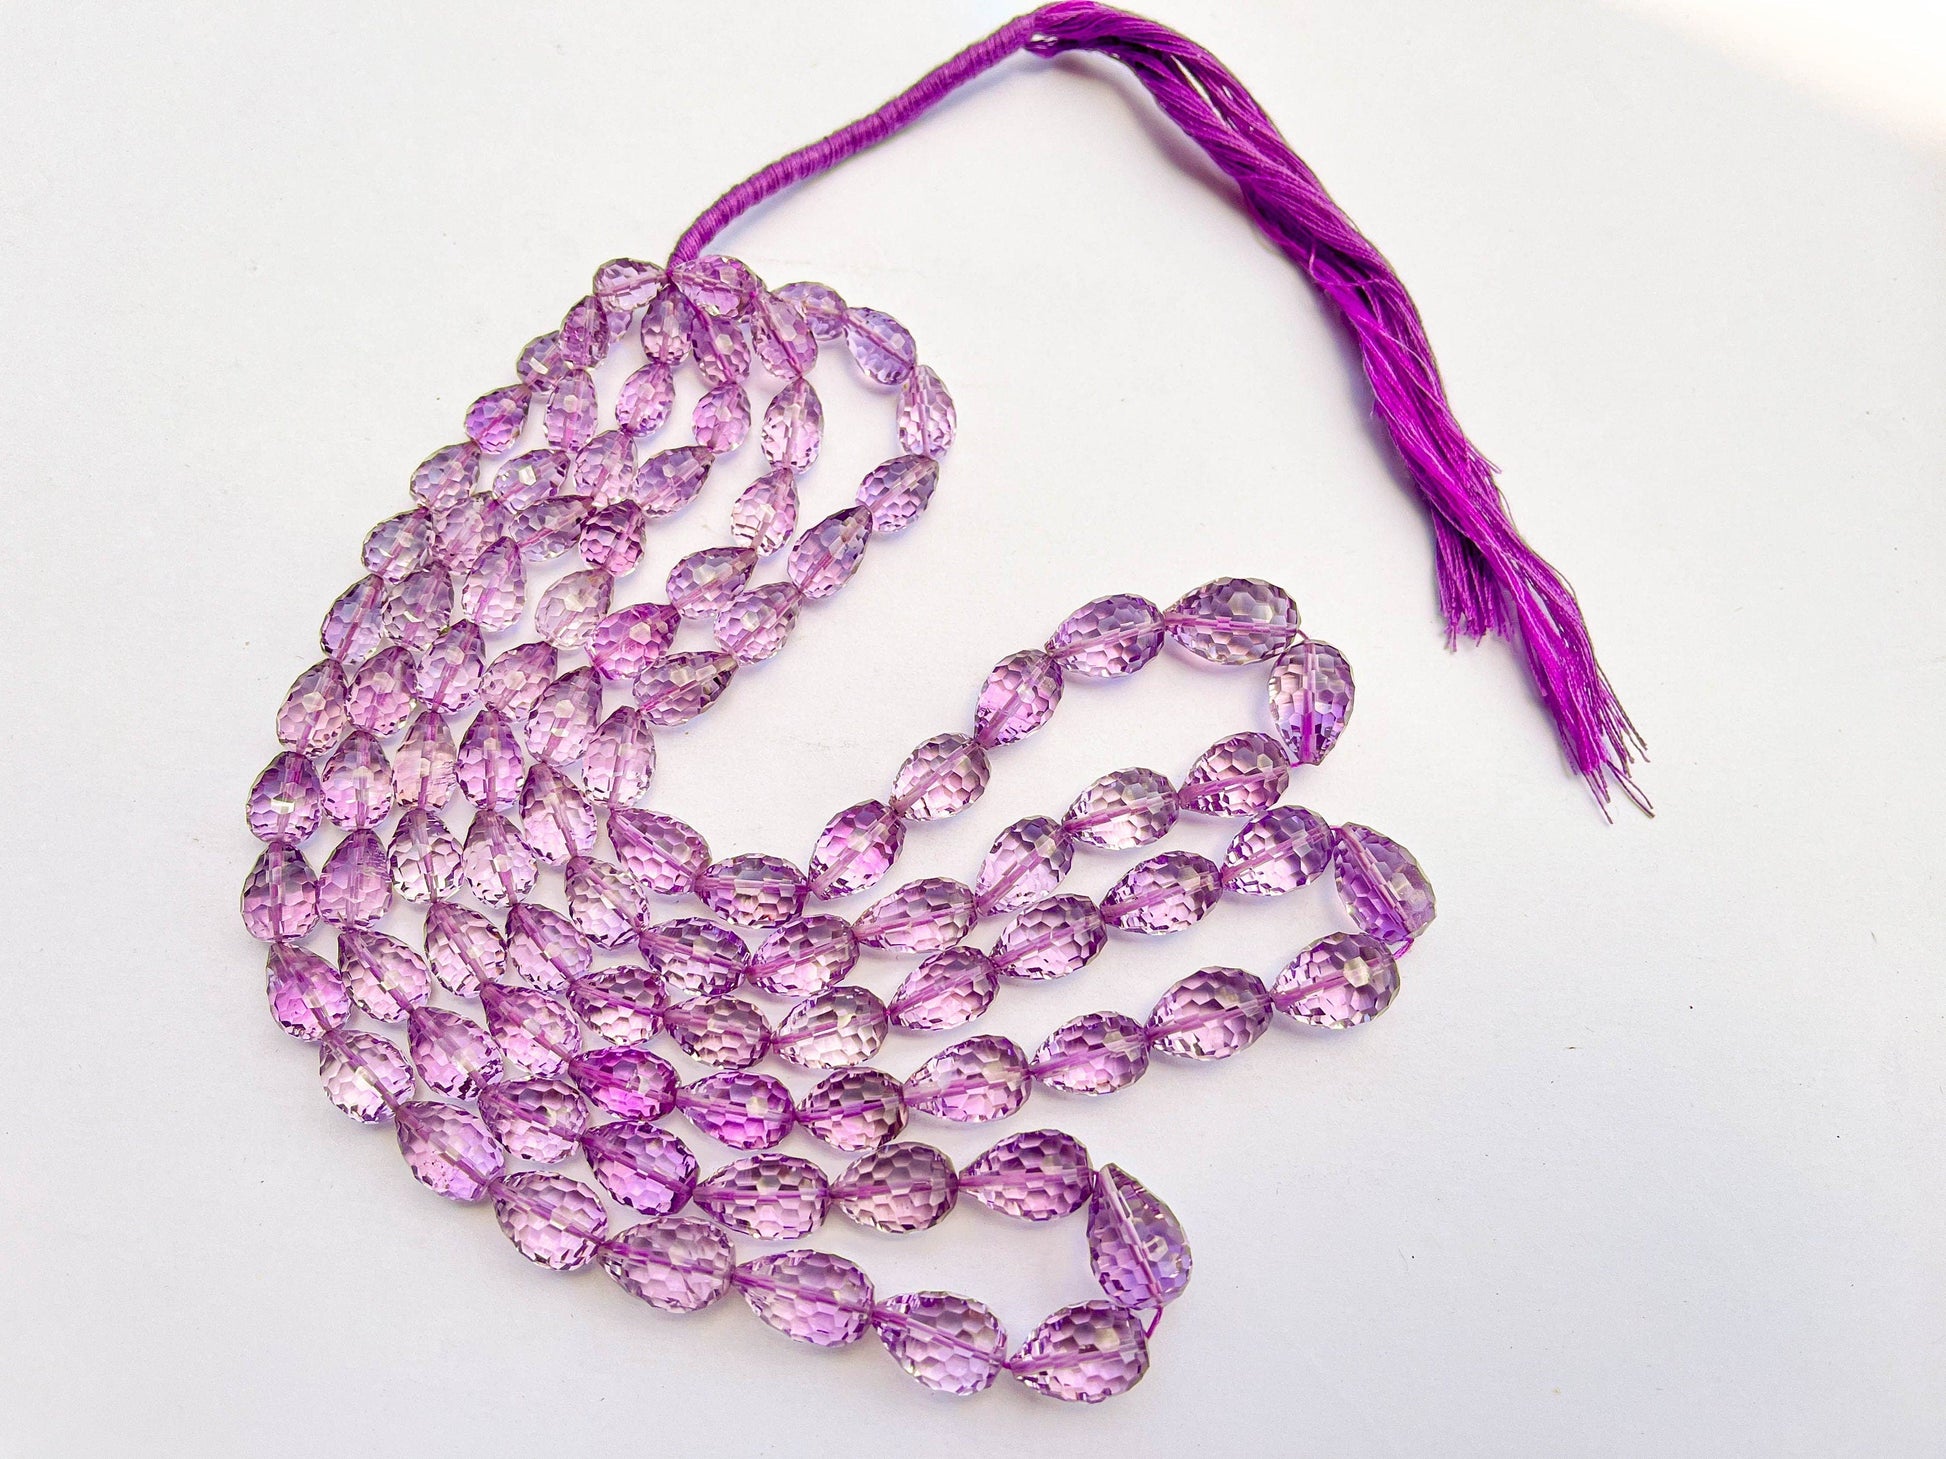 Amethyst Concave Cut Drops, Natural Gemstone Beads, 7x11mm to 10x15mm, 16 Inches String, 32 Pieces, Center Drill Beadsforyourjewelry